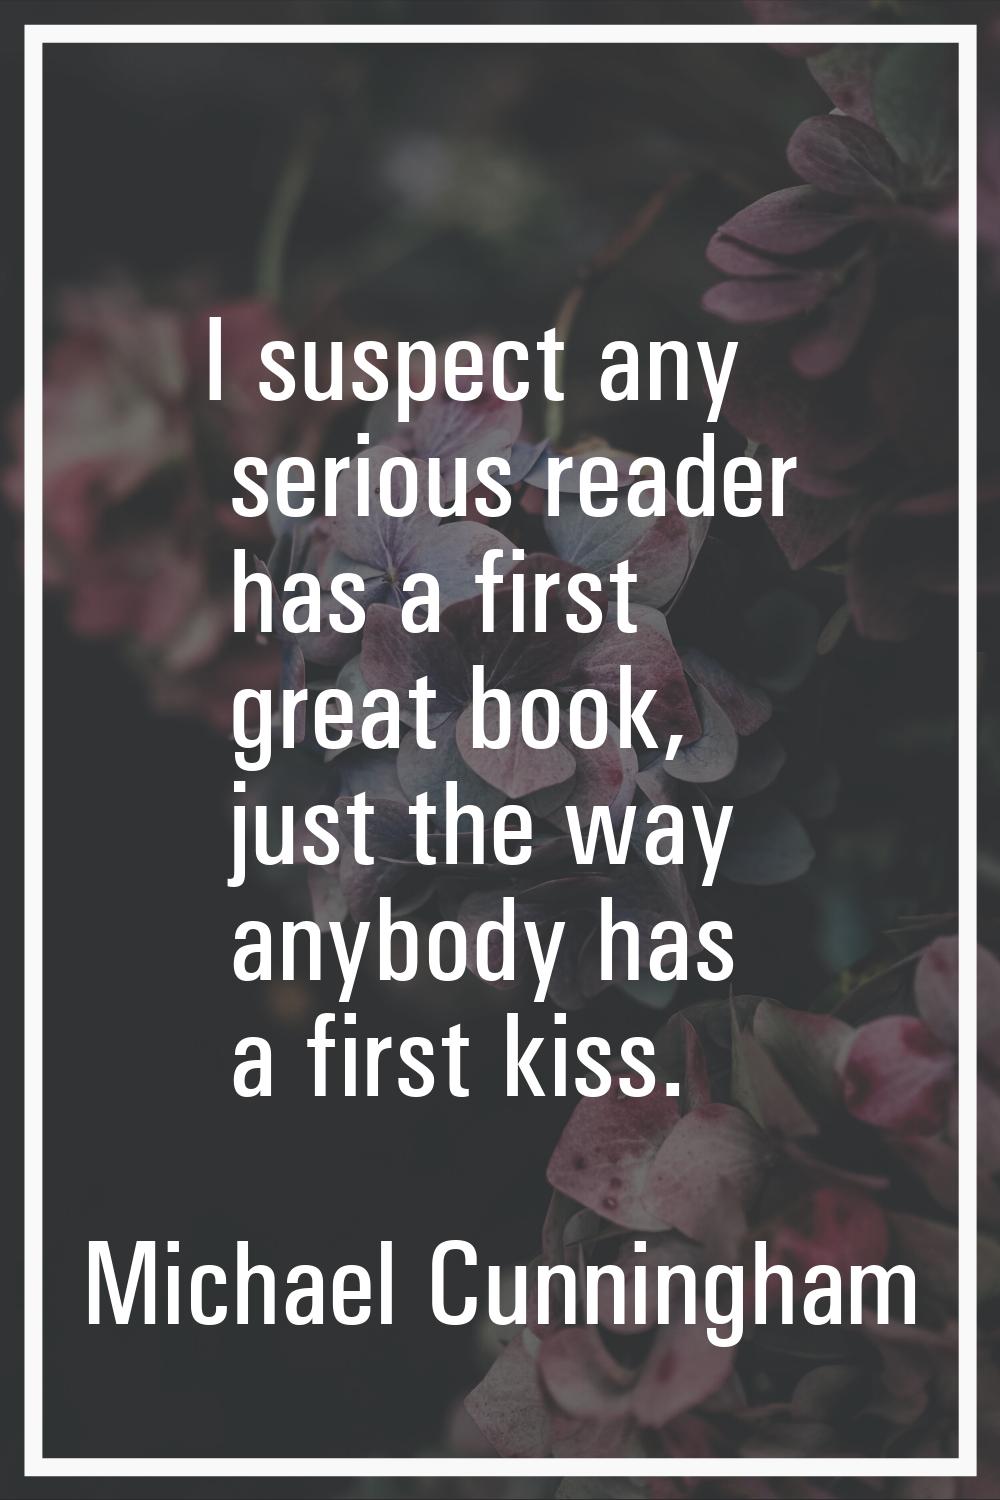 I suspect any serious reader has a first great book, just the way anybody has a first kiss.